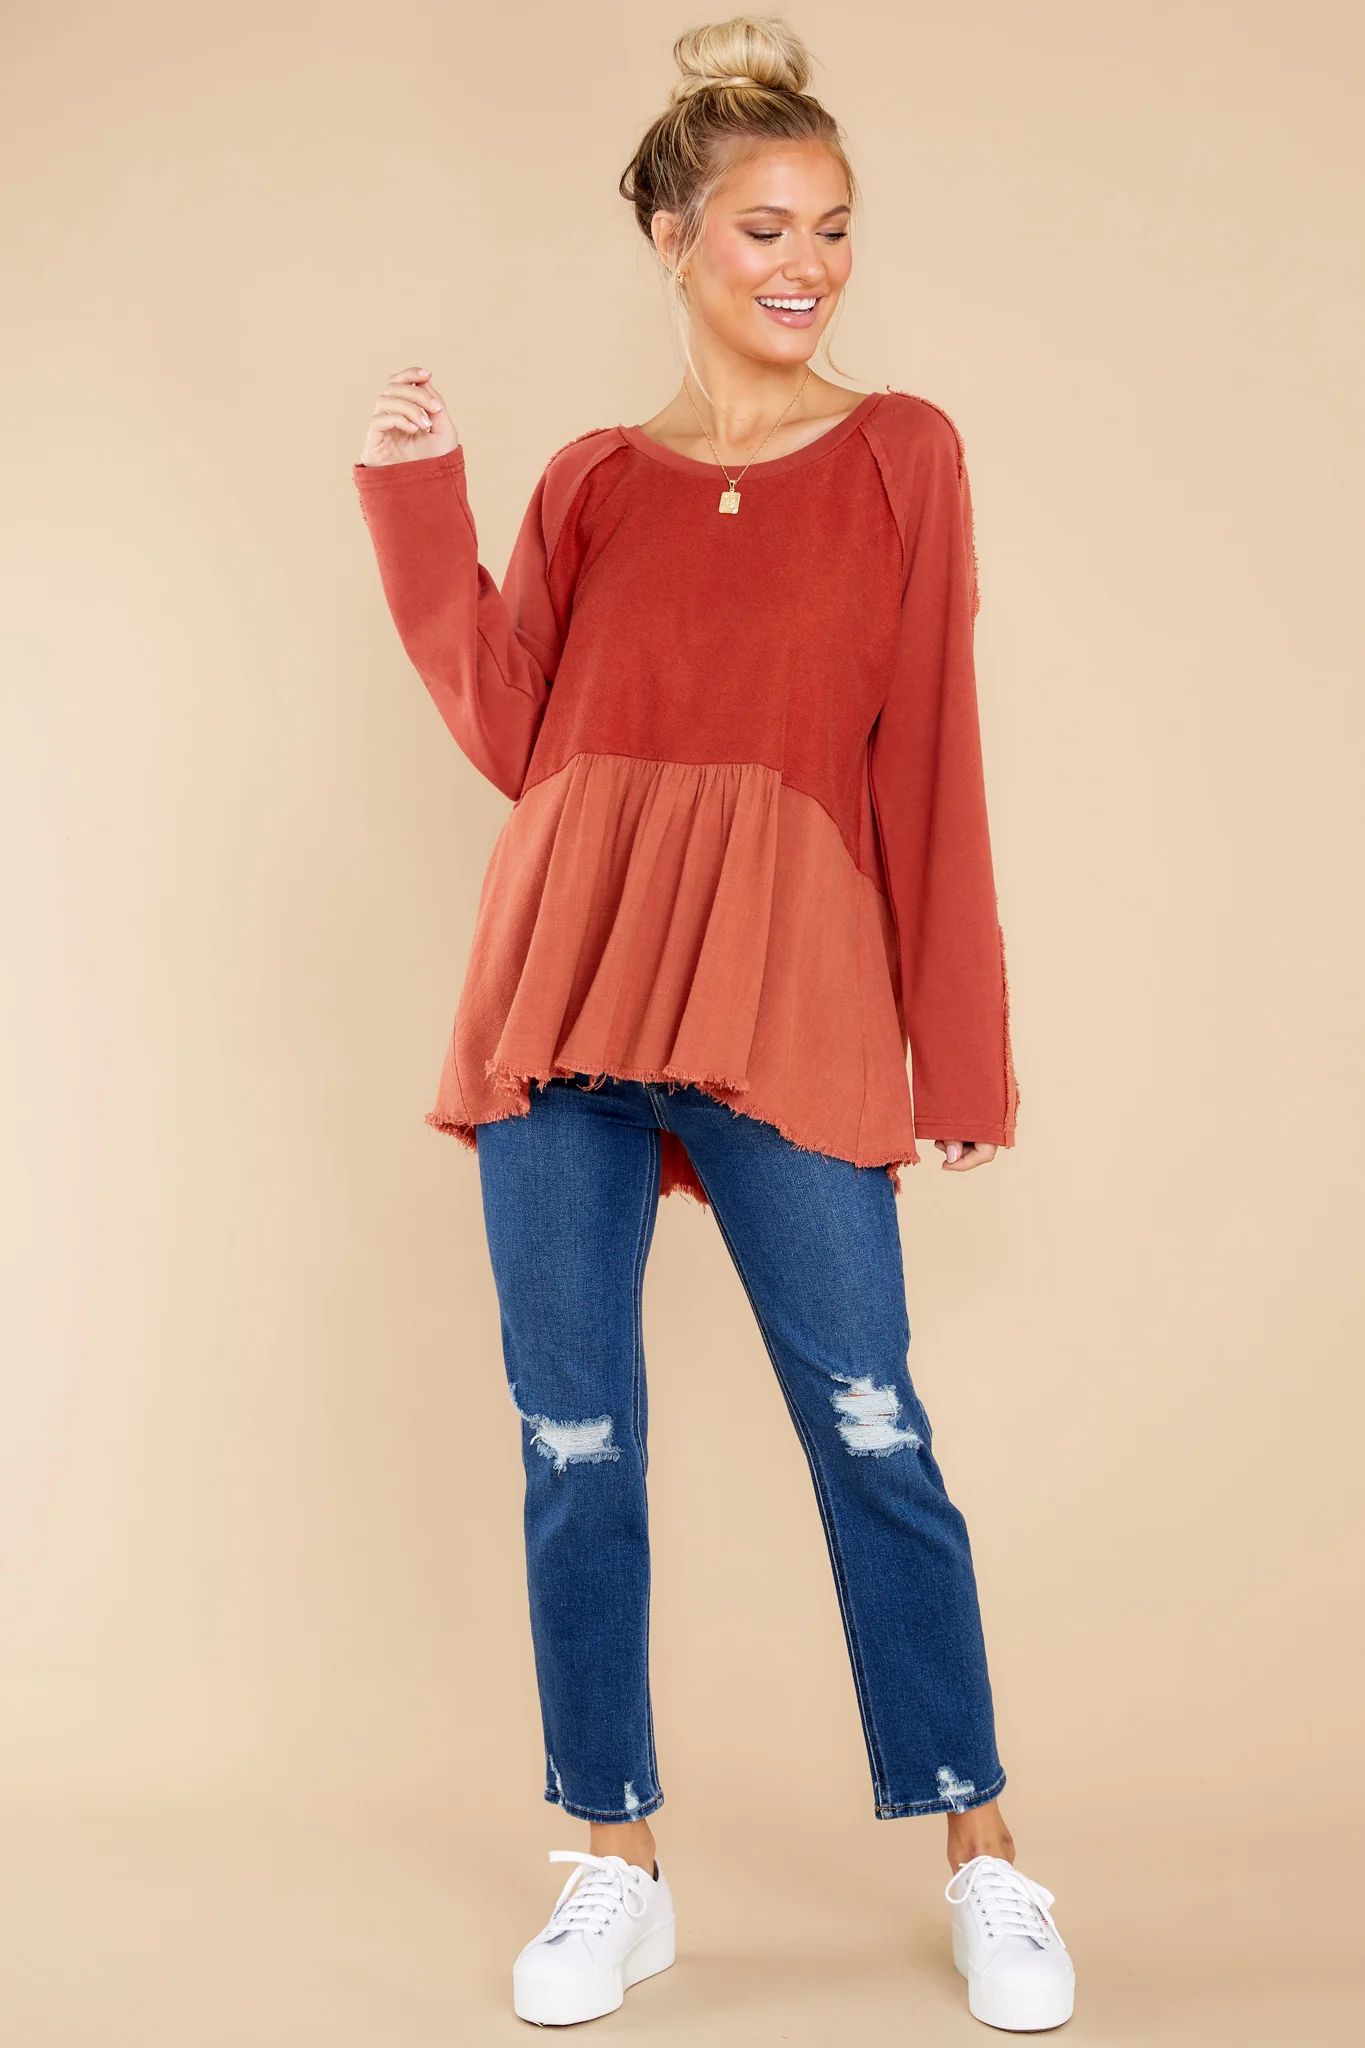 Two Way Street Rust Top | Red Dress 